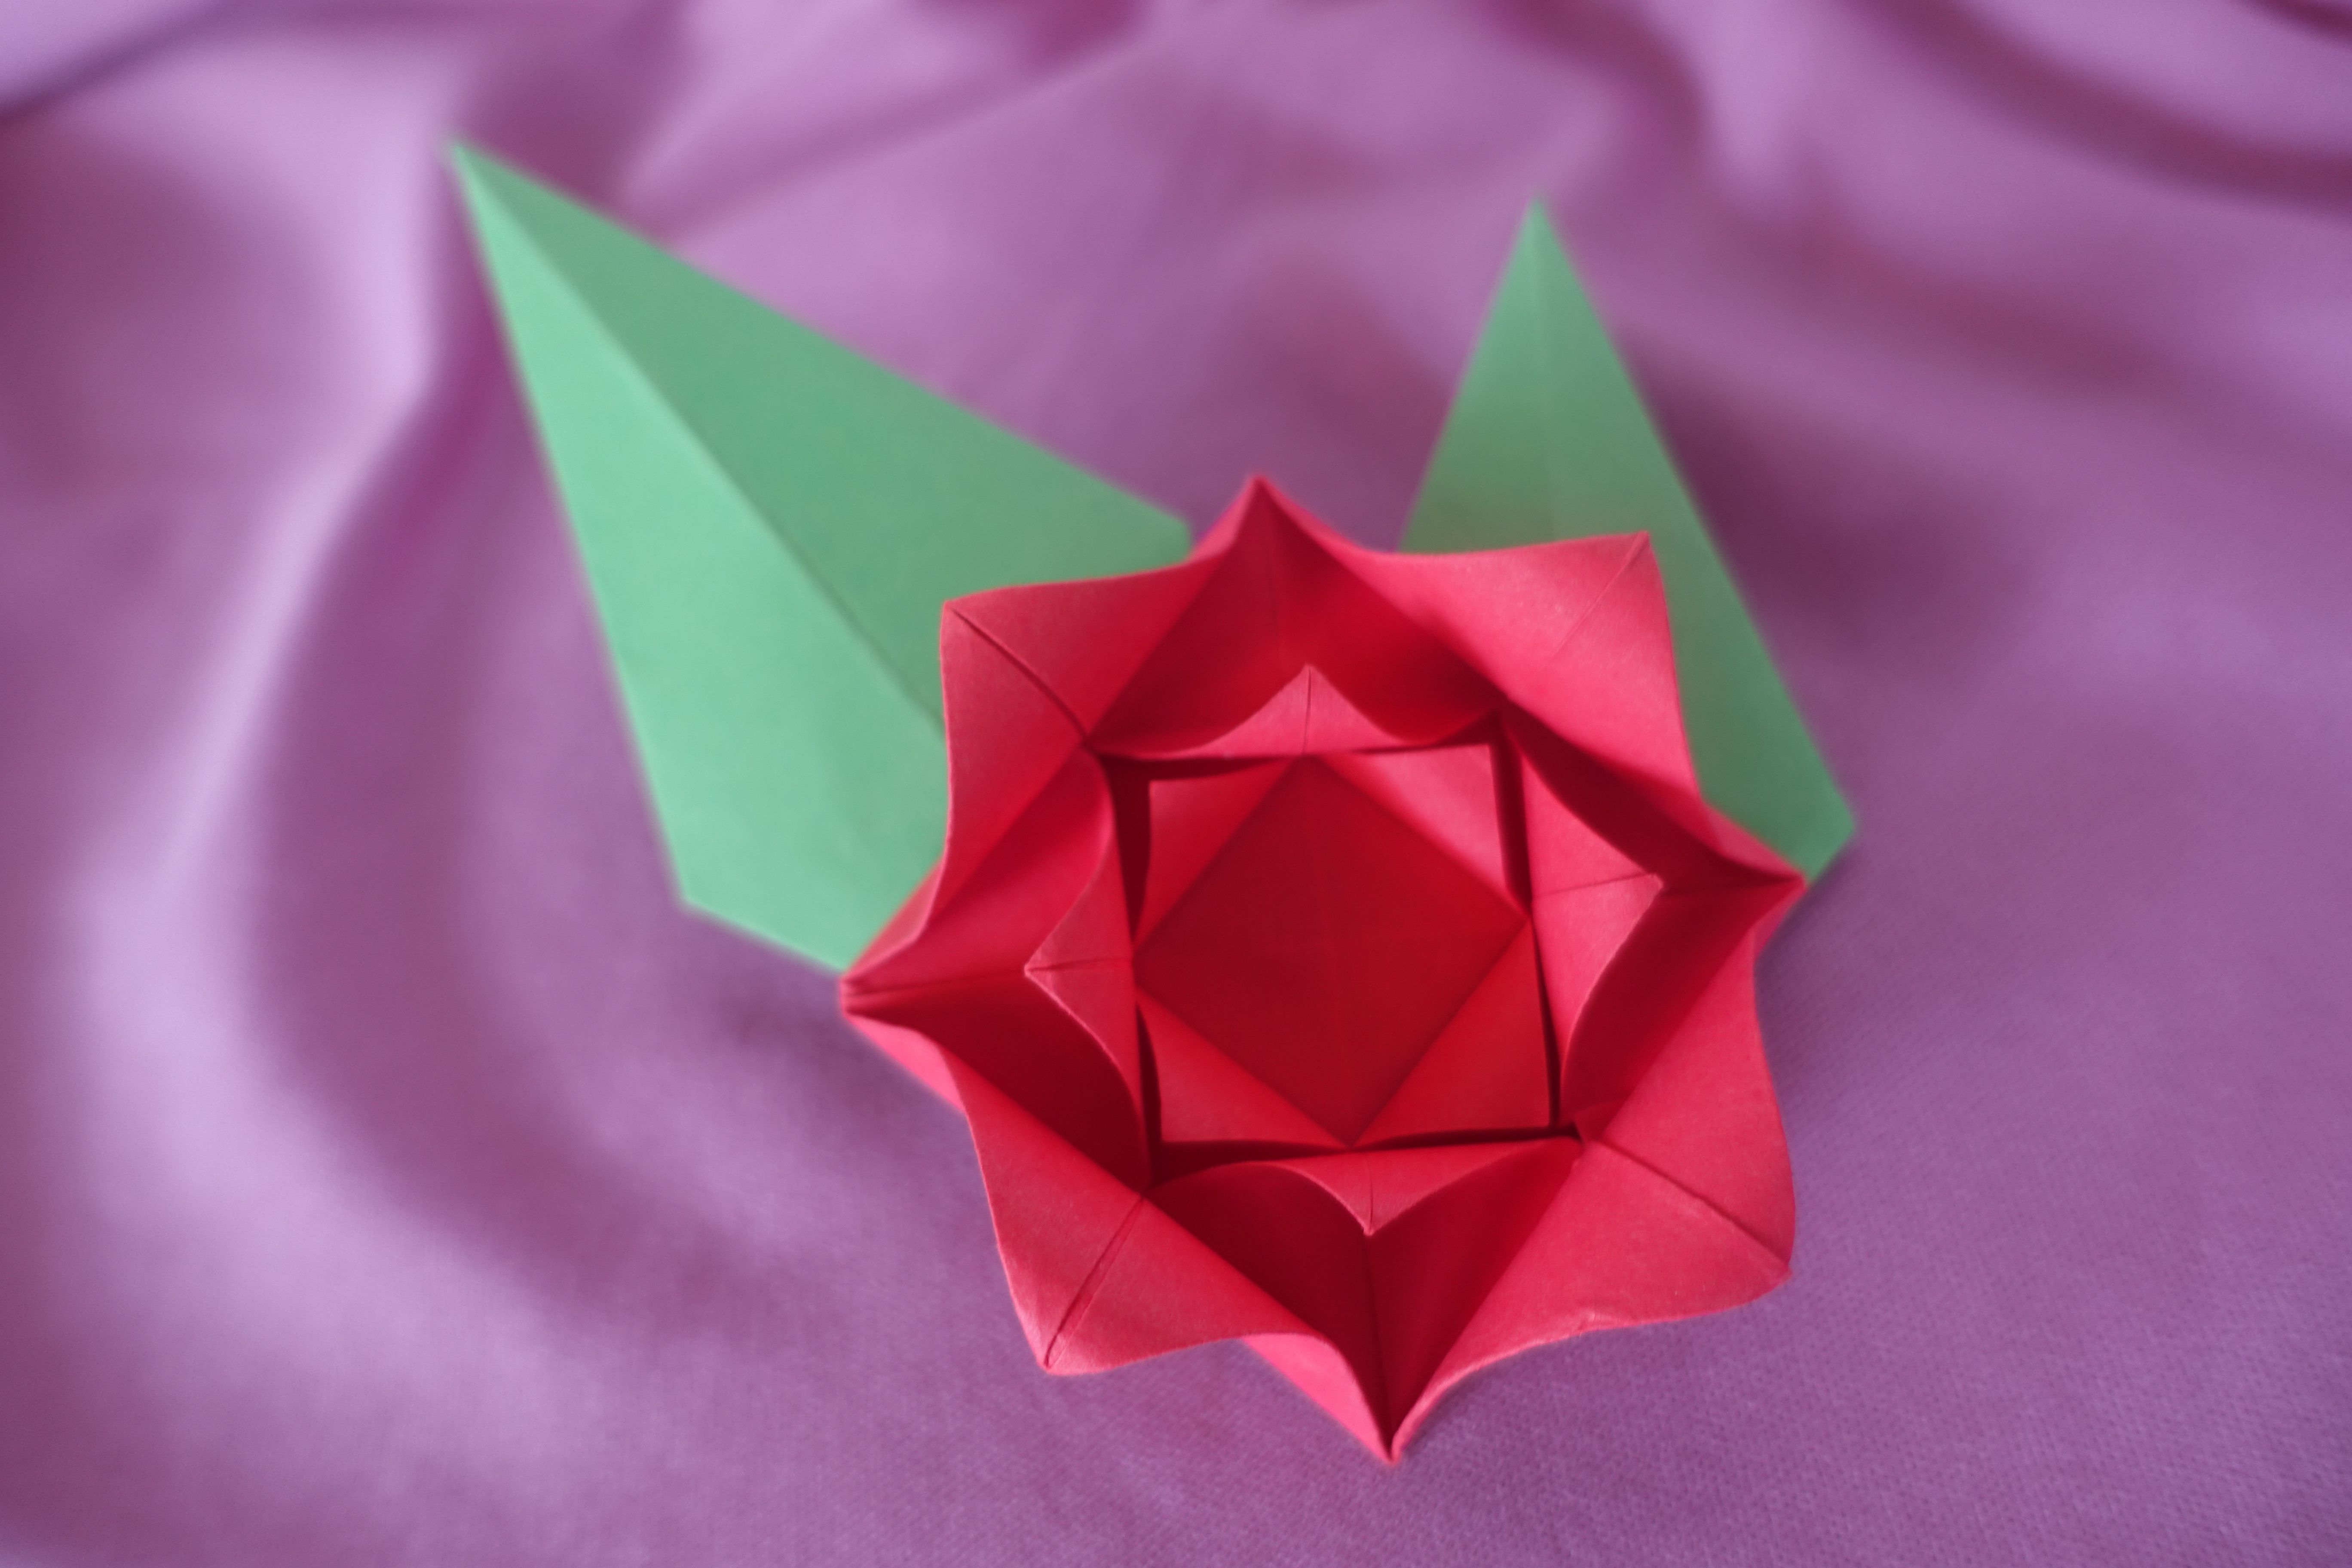 How To Design Origami Make An Easy Origami Rose